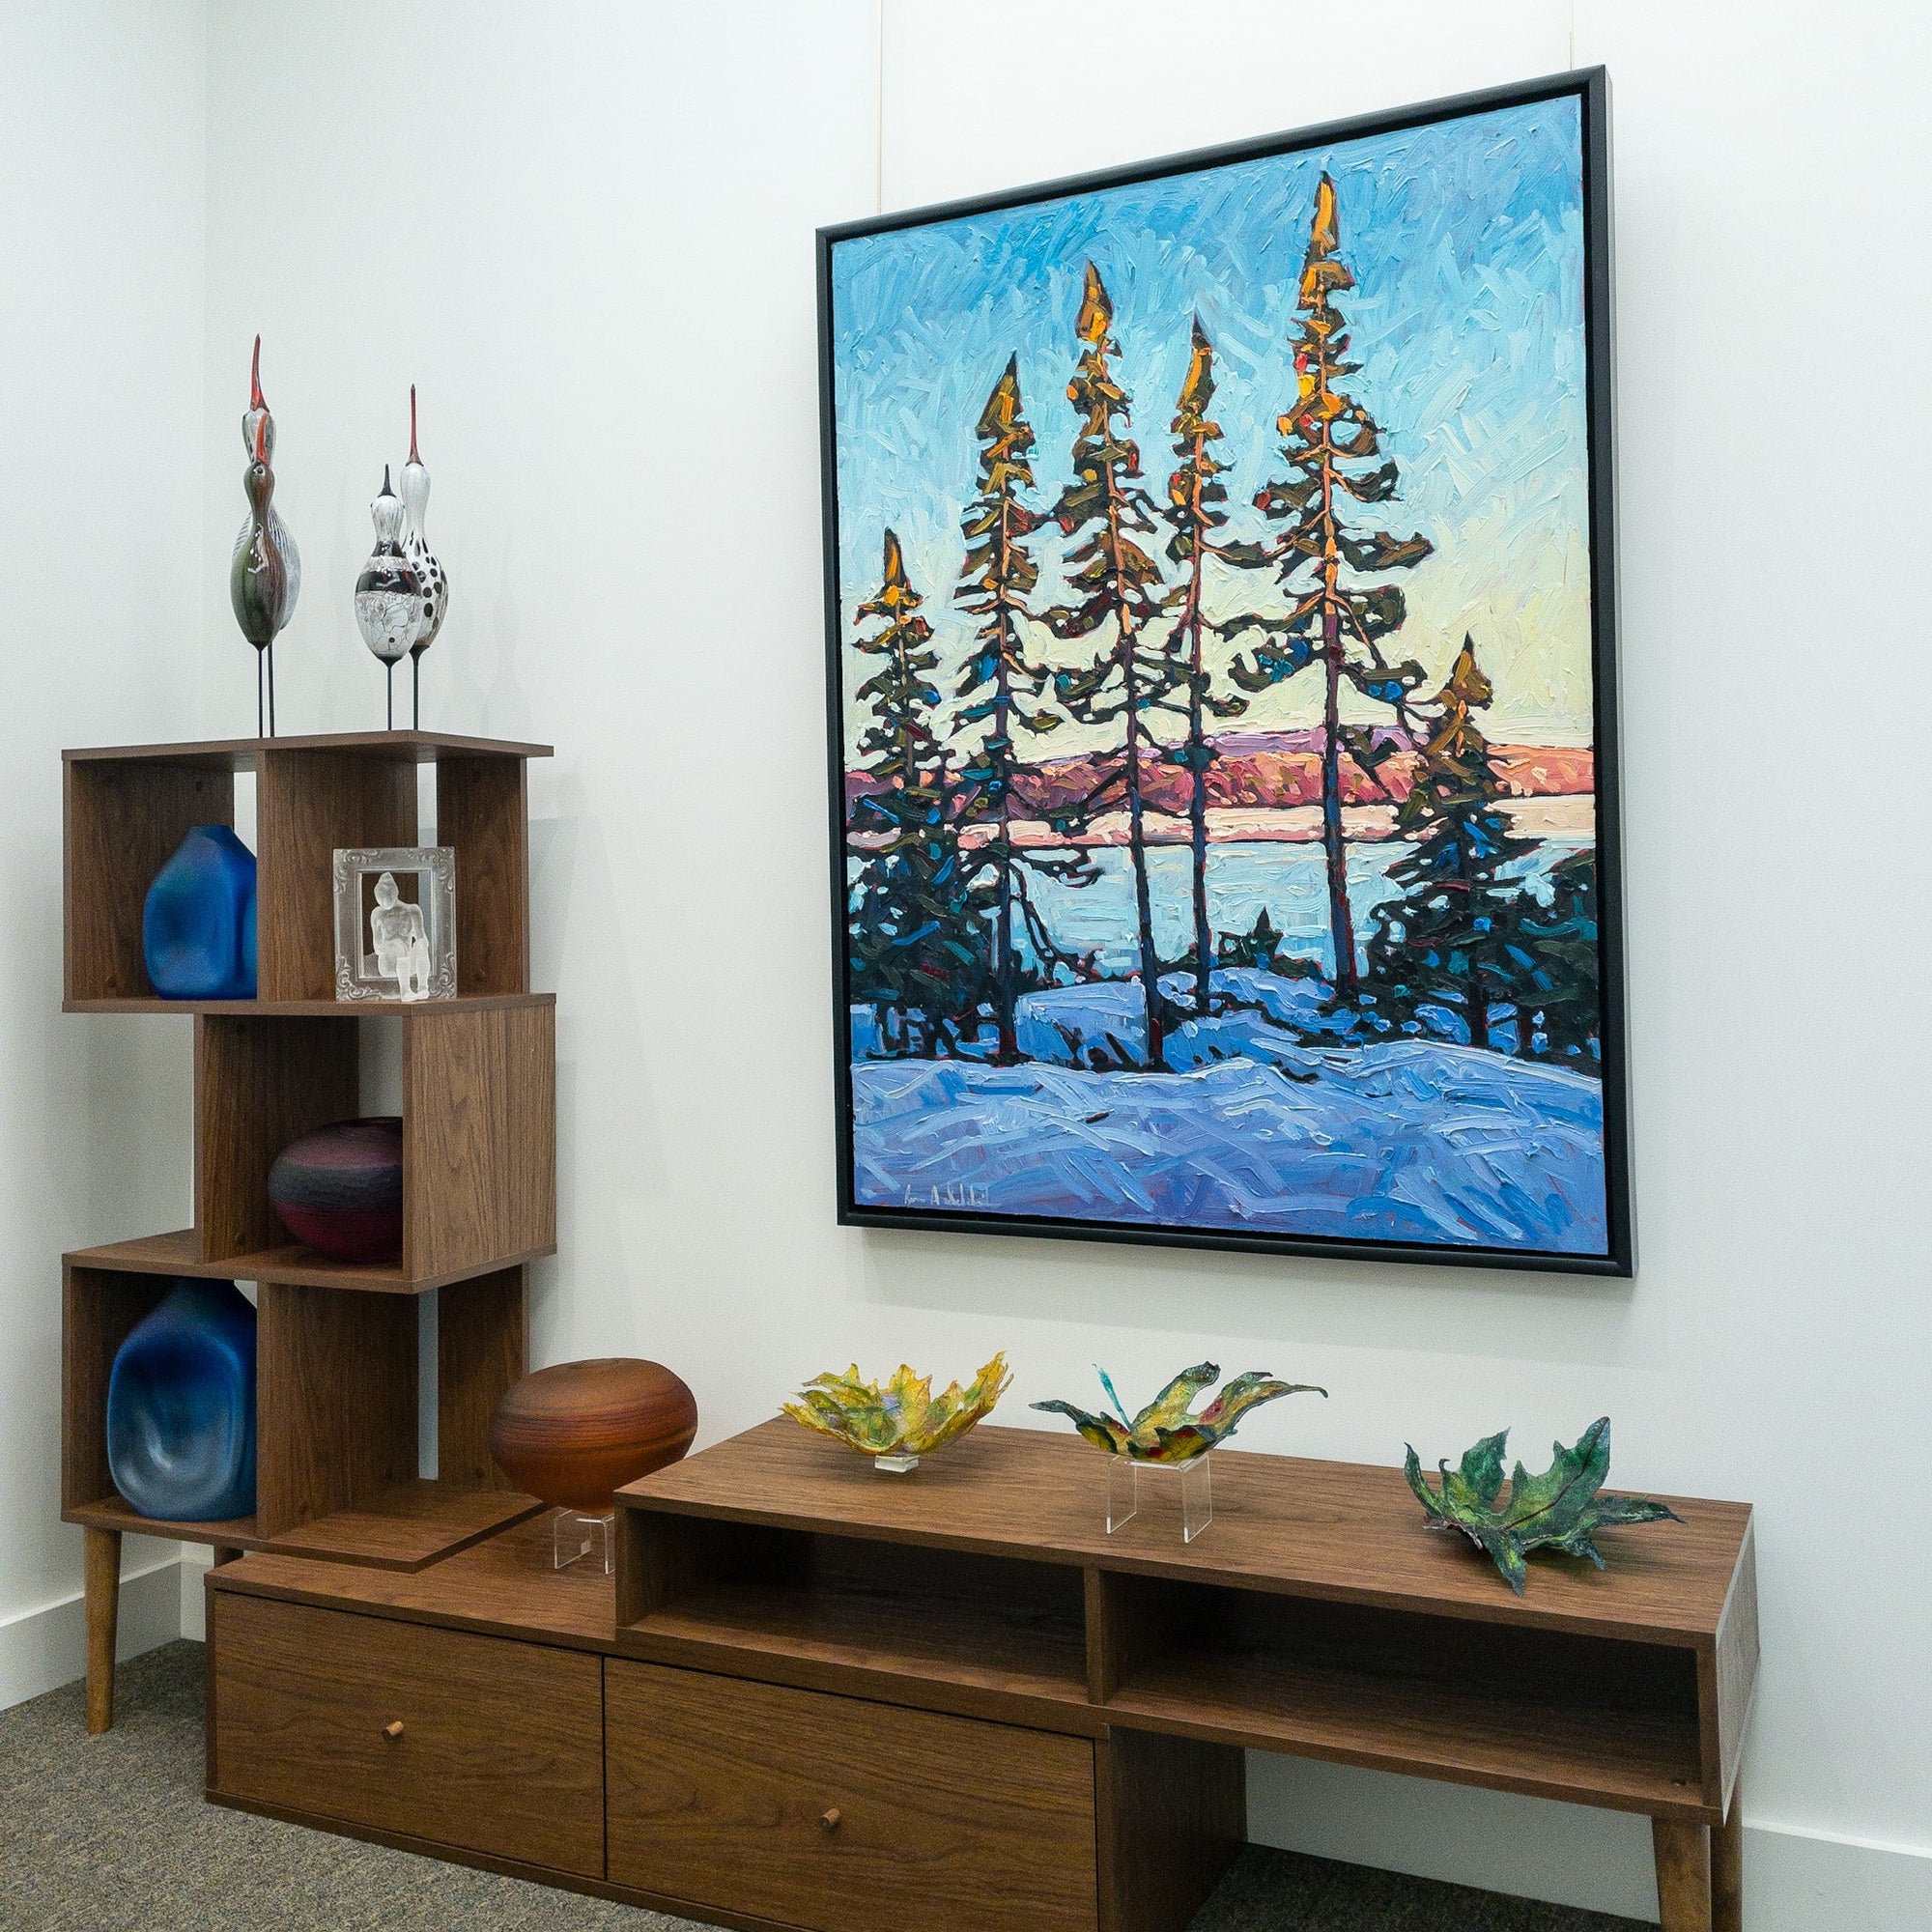 Ryan Sobkovich Stately Pines on Lake Superior | 48" x 36" Oil on Canvas